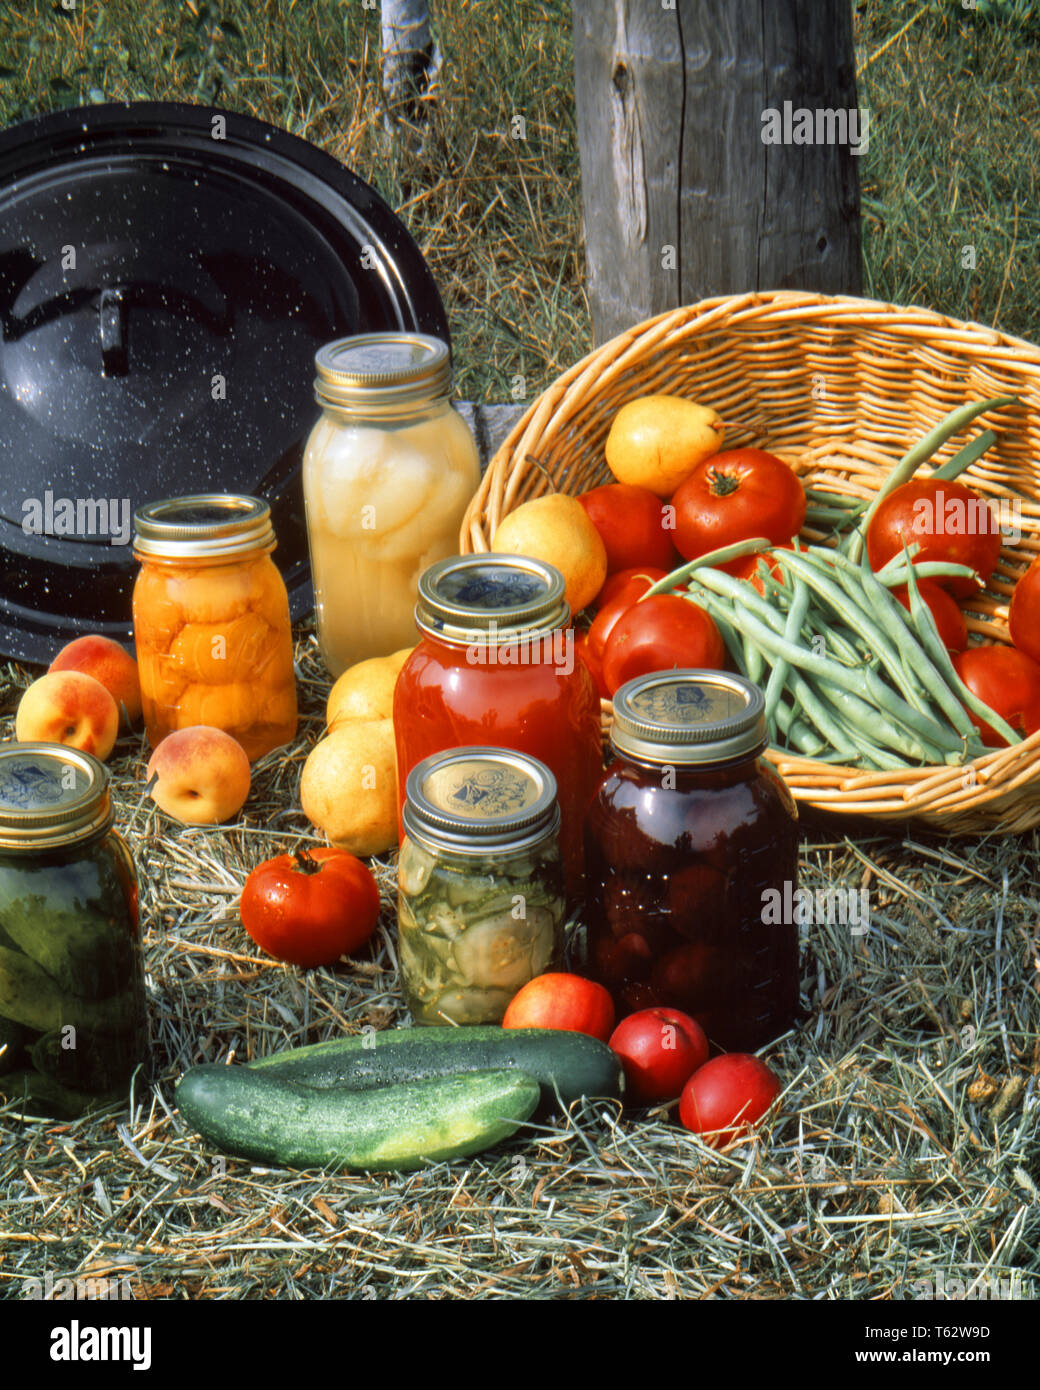 1970s CANNED PRESERVED FRUITS AND VEGETABLES IN GLASS JARS PEACHES PEARS PLUMS TOMATOES STRING BEANS BEATS CUCUMBERS - kf17903 PHT001 HARS NATURAL SIMPLE CONCEPTUAL STILL LIFE BOILING BOTTLING TOMATOES CUCUMBERS STRING BEANS FRUITS GLASS JARS HOMEMADE JARS PLUMS PRESERVING BASIC BEETS OLD FASHIONED PRESERVED Stock Photo